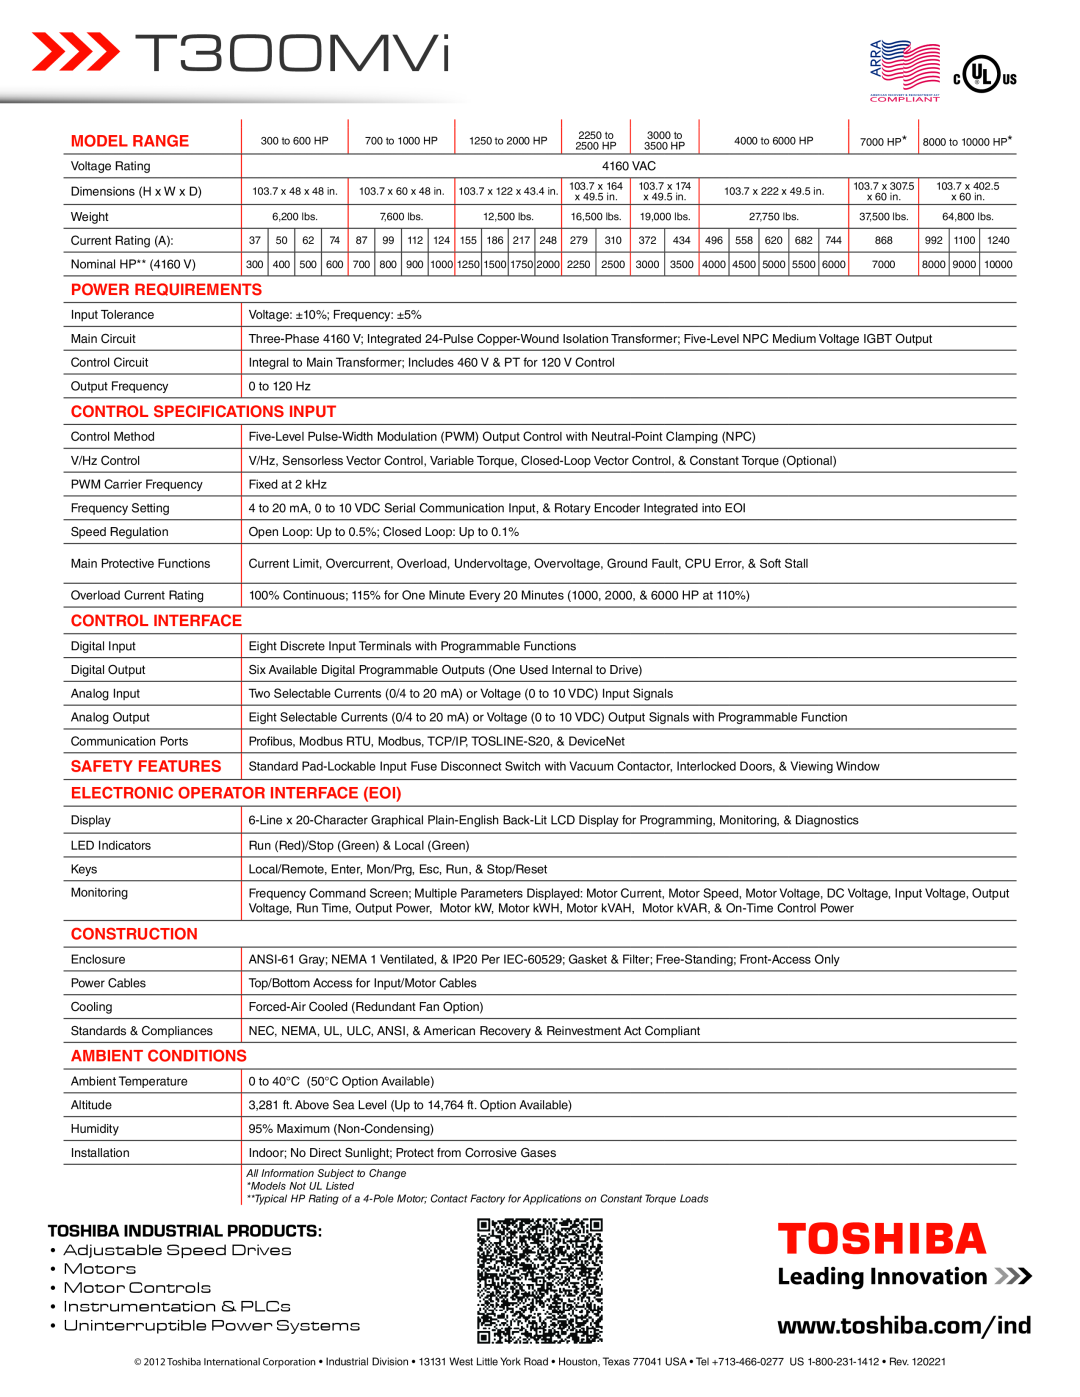 Toshiba T300MVi Model Range, Power Requirements, Control Specifications Input, Control Interface, Safety Features, Motors 